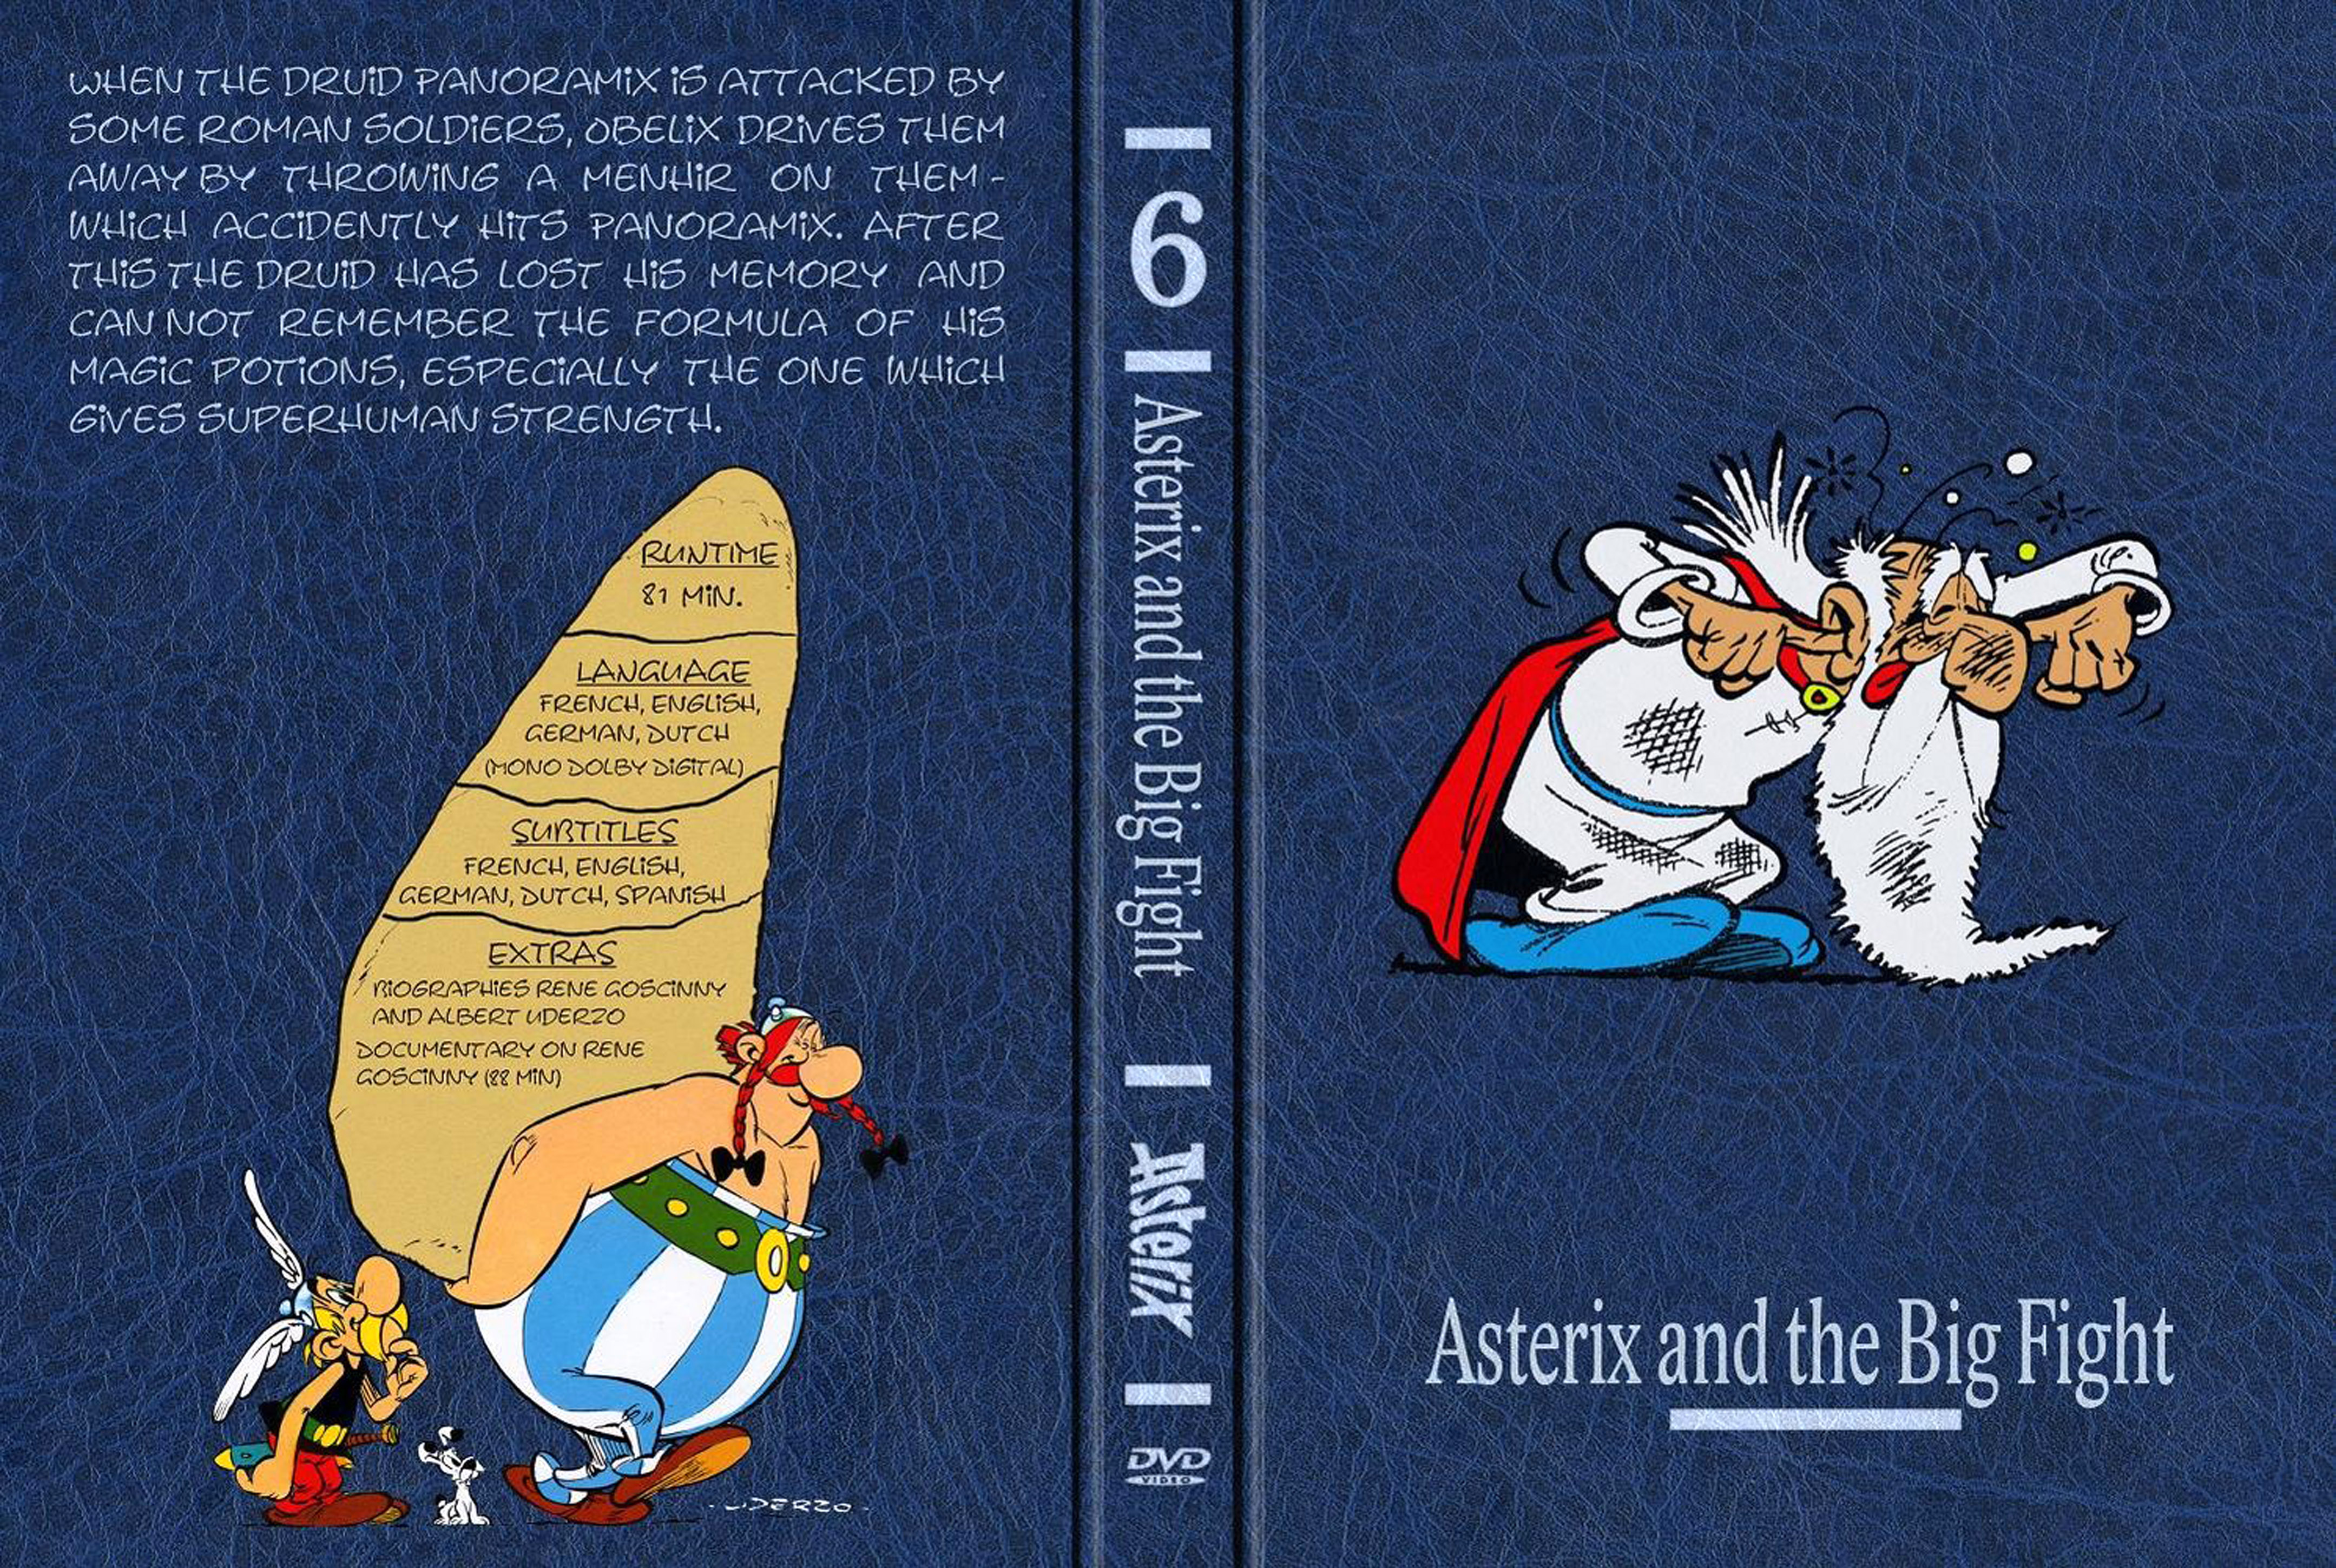 okładki - A - ASTERIX COLLECTION 6 - Asterix And The Big Fight _ang -400.jpg